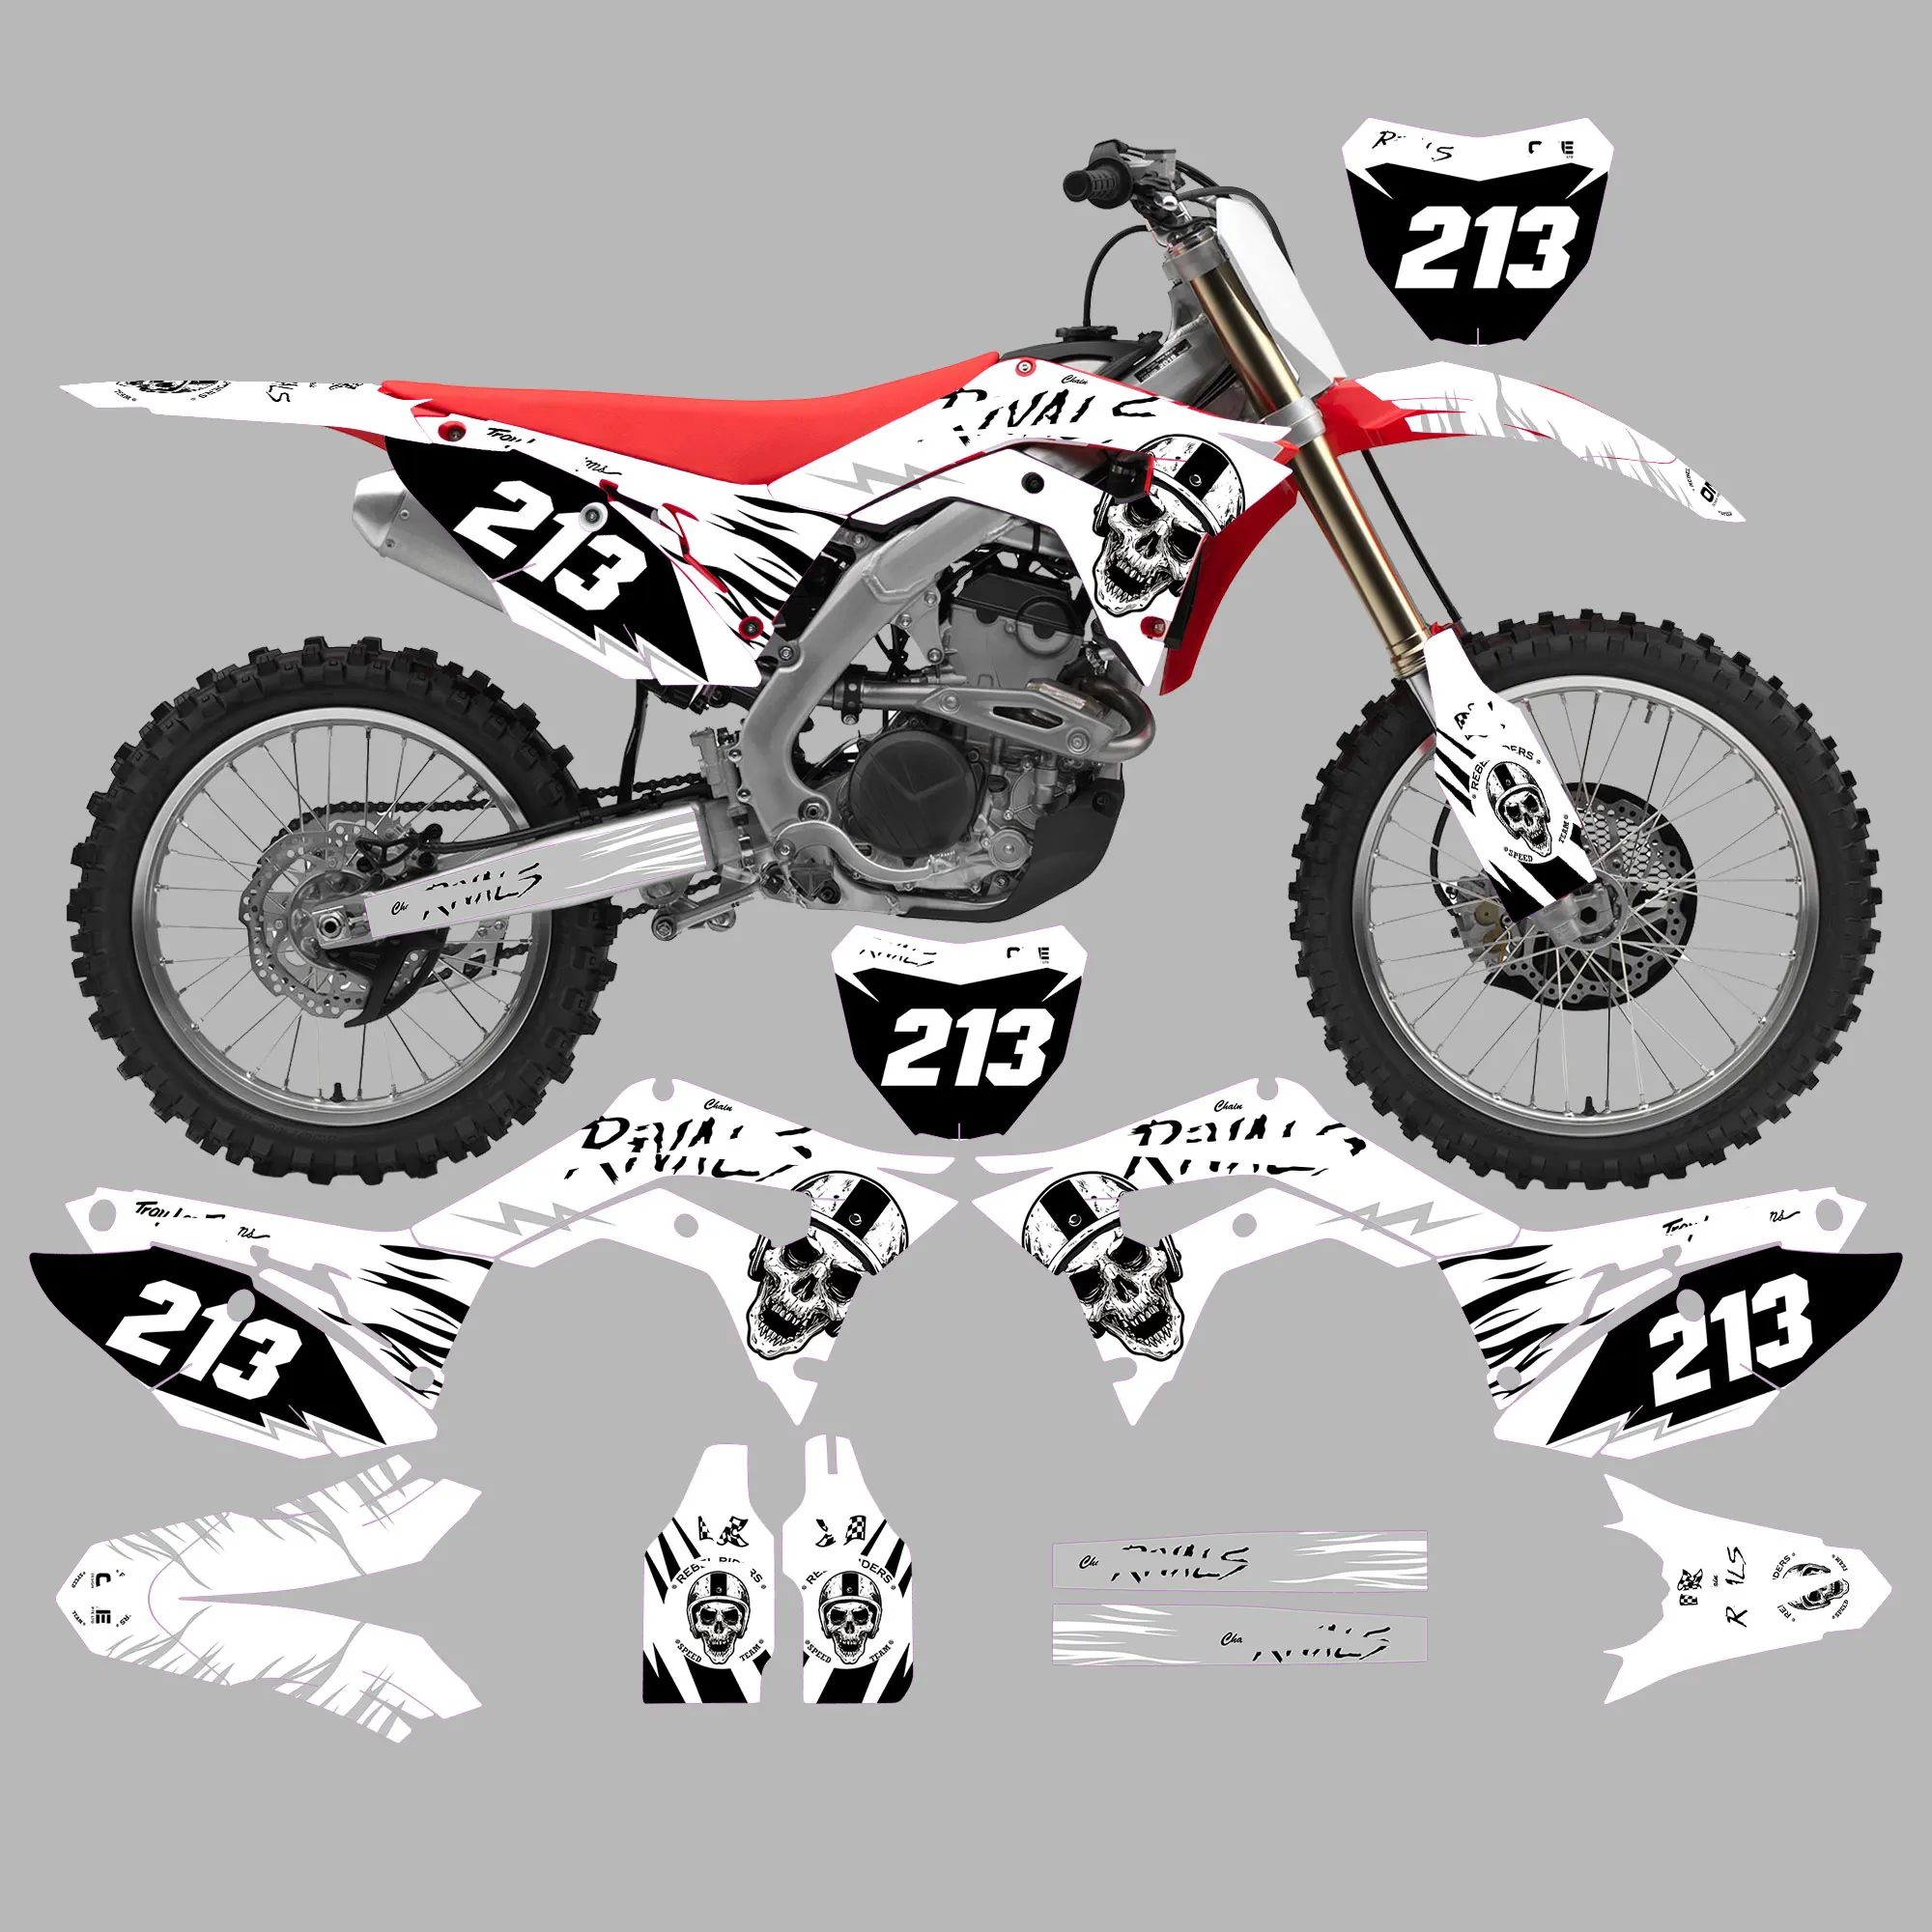 Graphic Kit for    2018-2020CRF 250R     2017-2020 CRF450R     2017 2018 2019 2020     Motocross Decals Sticker graphic kit for 2018 2020crf 250r 2017 2020 crf450r 2017 2018 2019 2020 motocross decals sticker